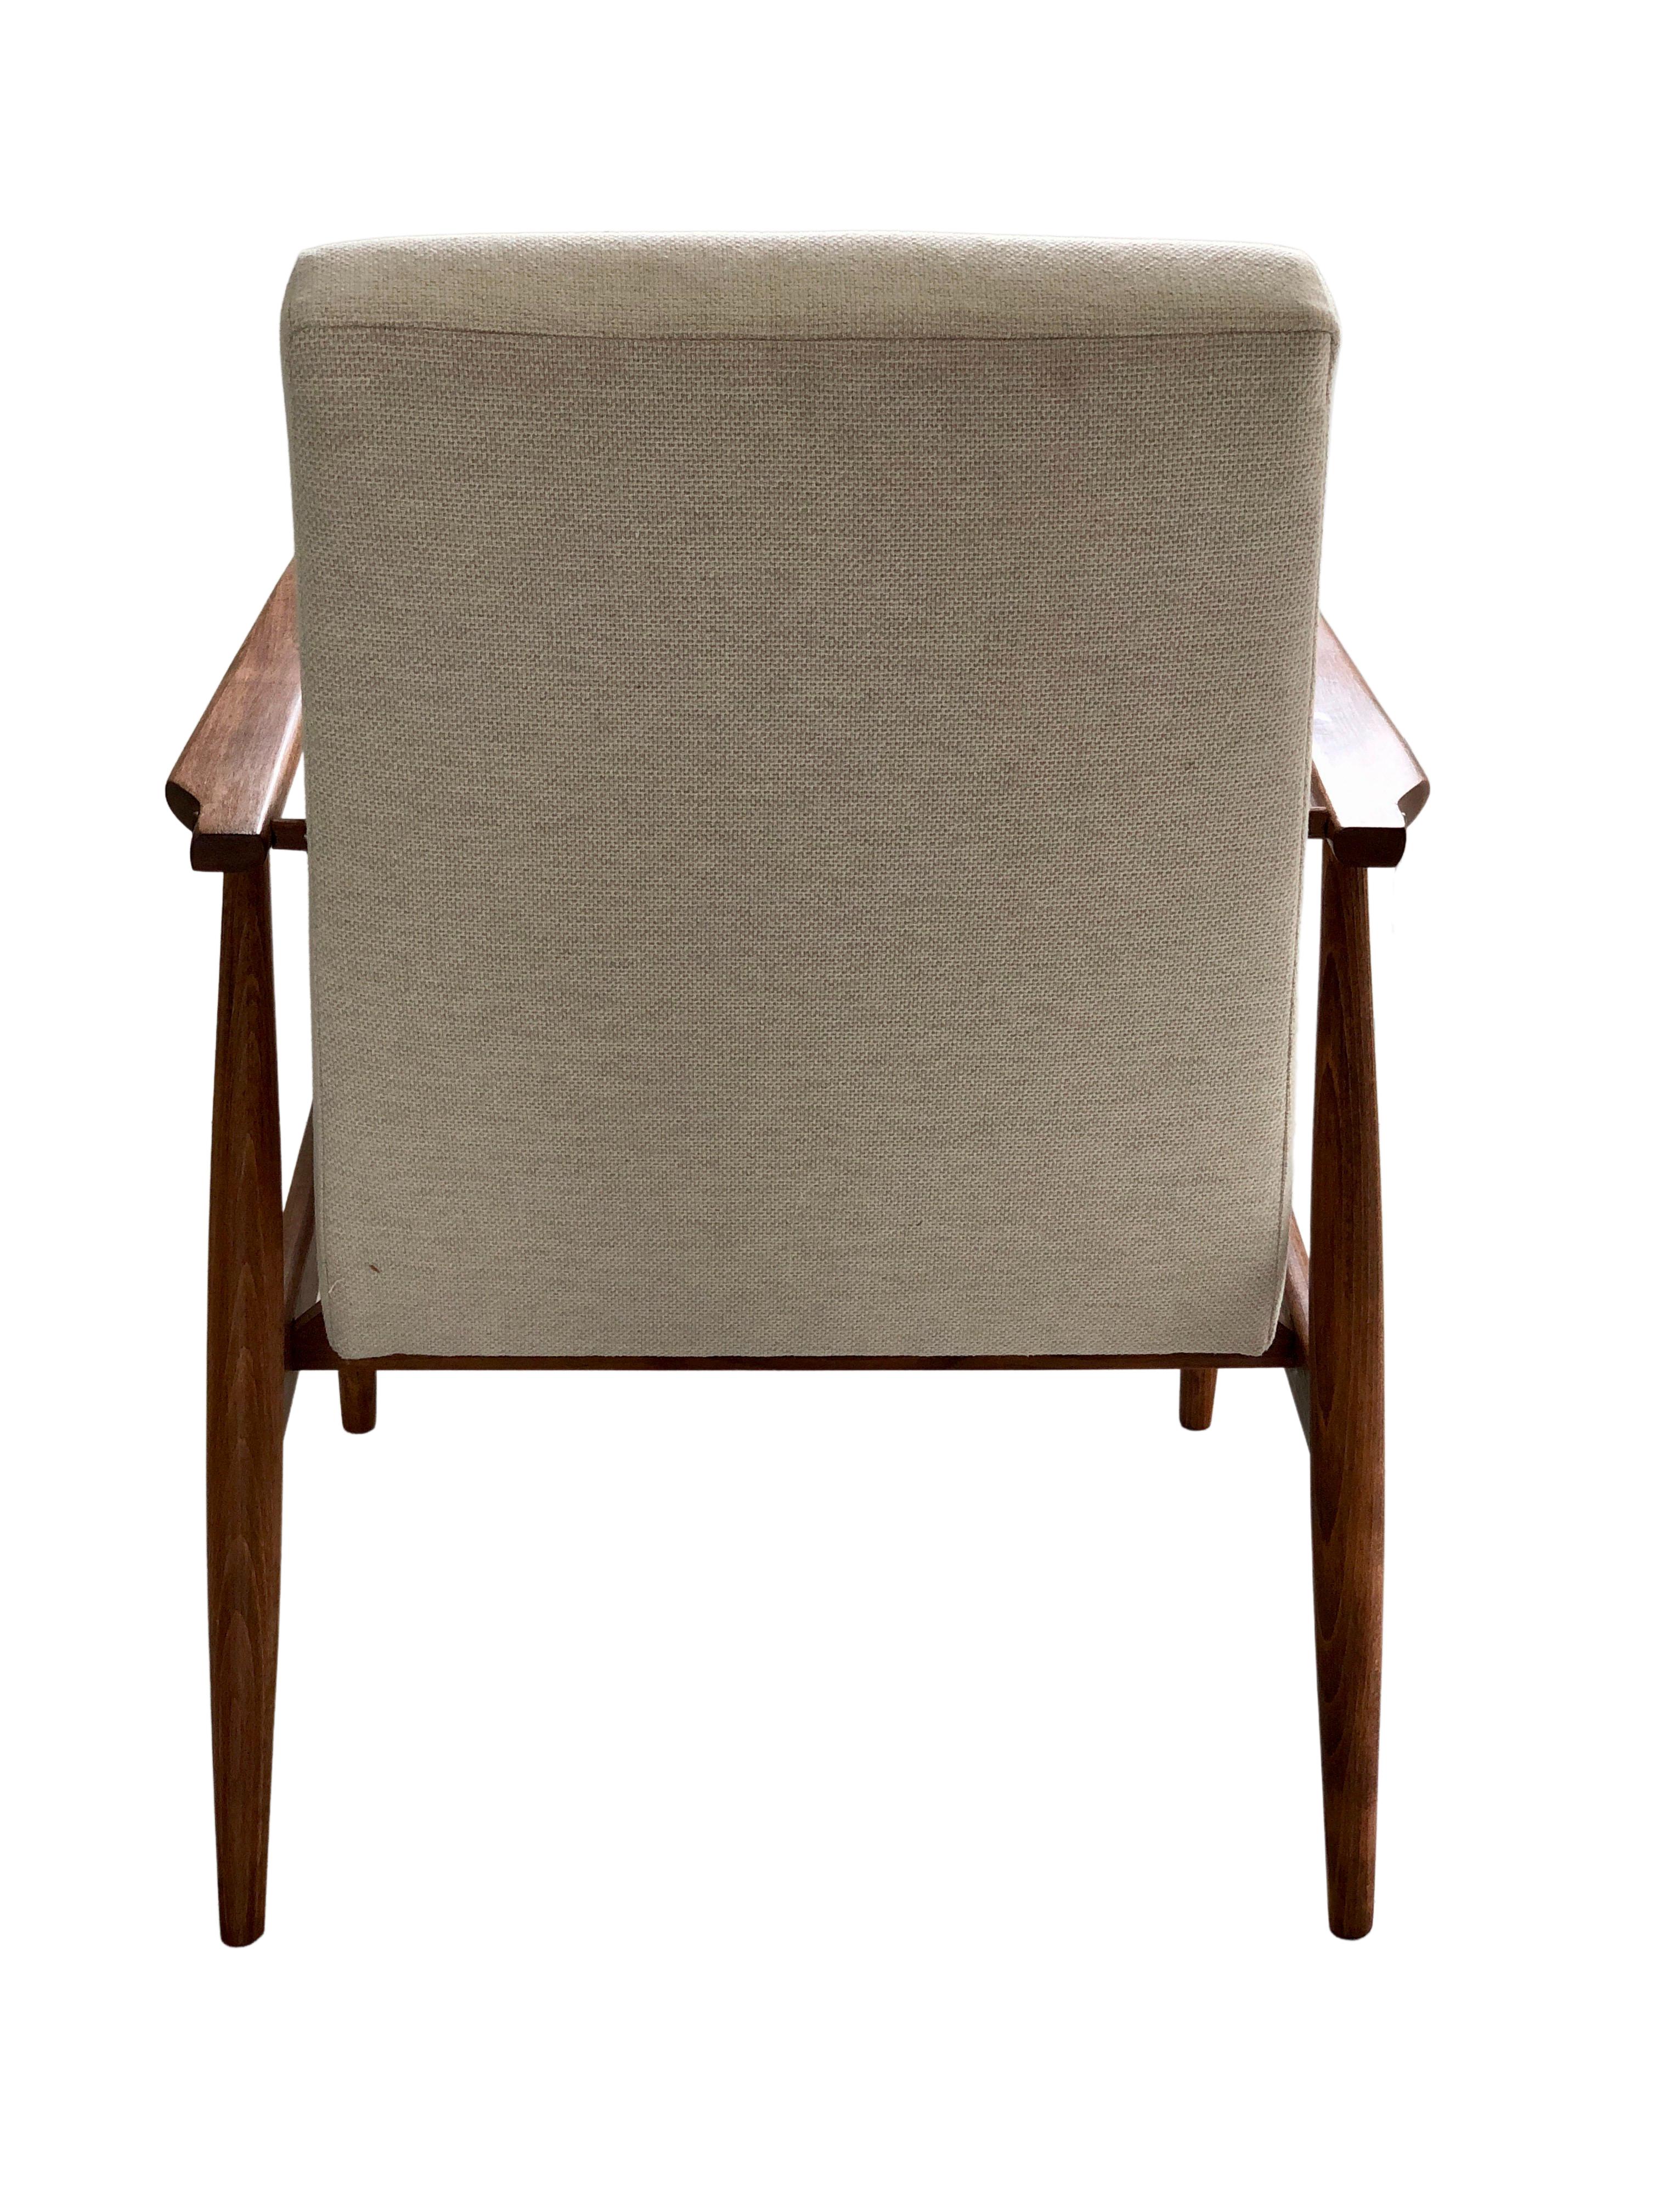 Hand-Crafted Midcentury Set of Two Beige Armchairs by Henryk Lis, Europe, 1960s For Sale